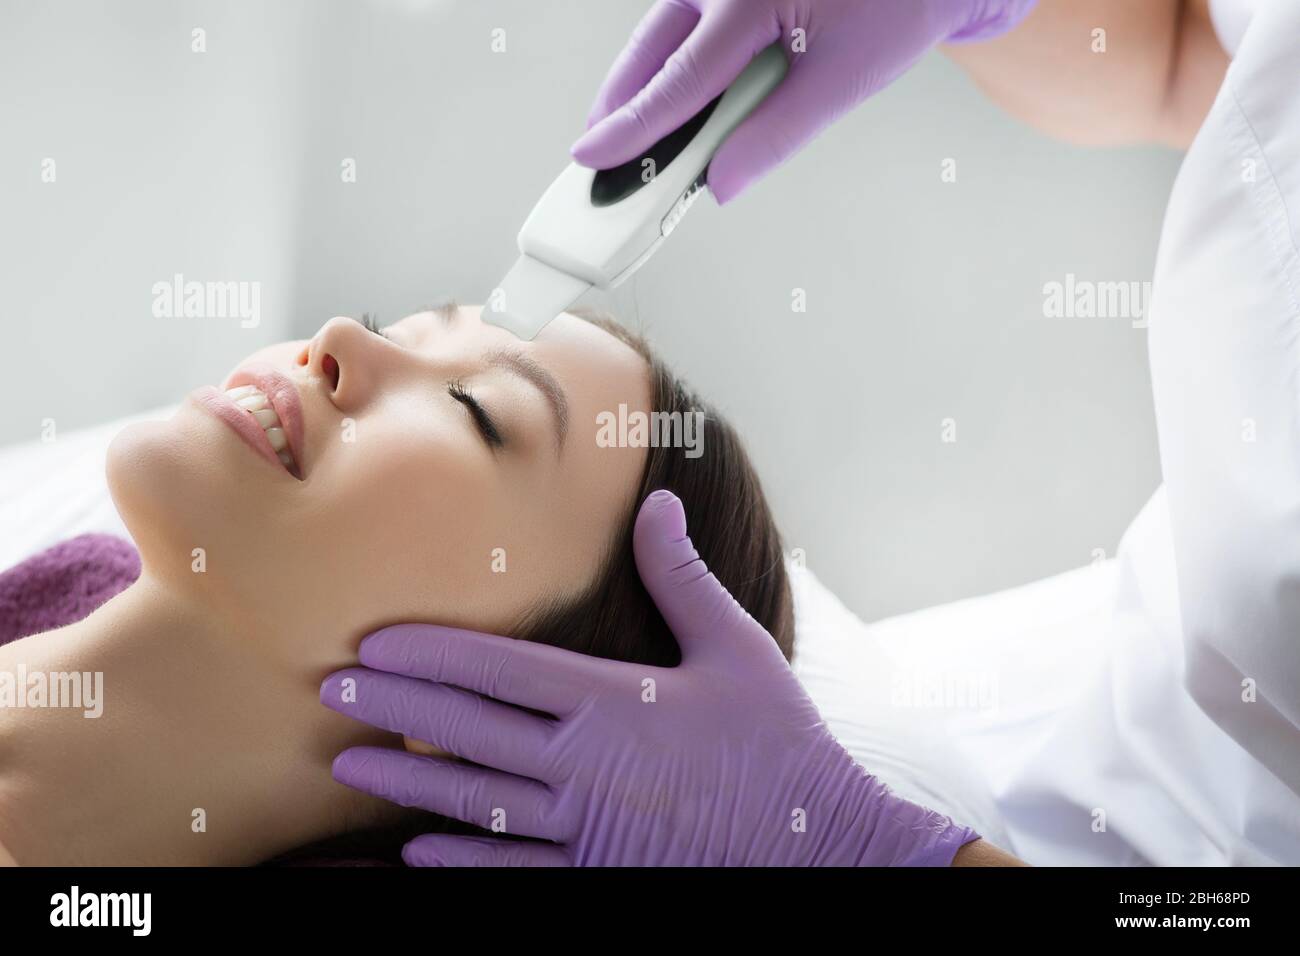 woman receiving ultrasound cavitation facial peel. get clean face without blackheads and skin defects using ultrasound equipment Stock Photo